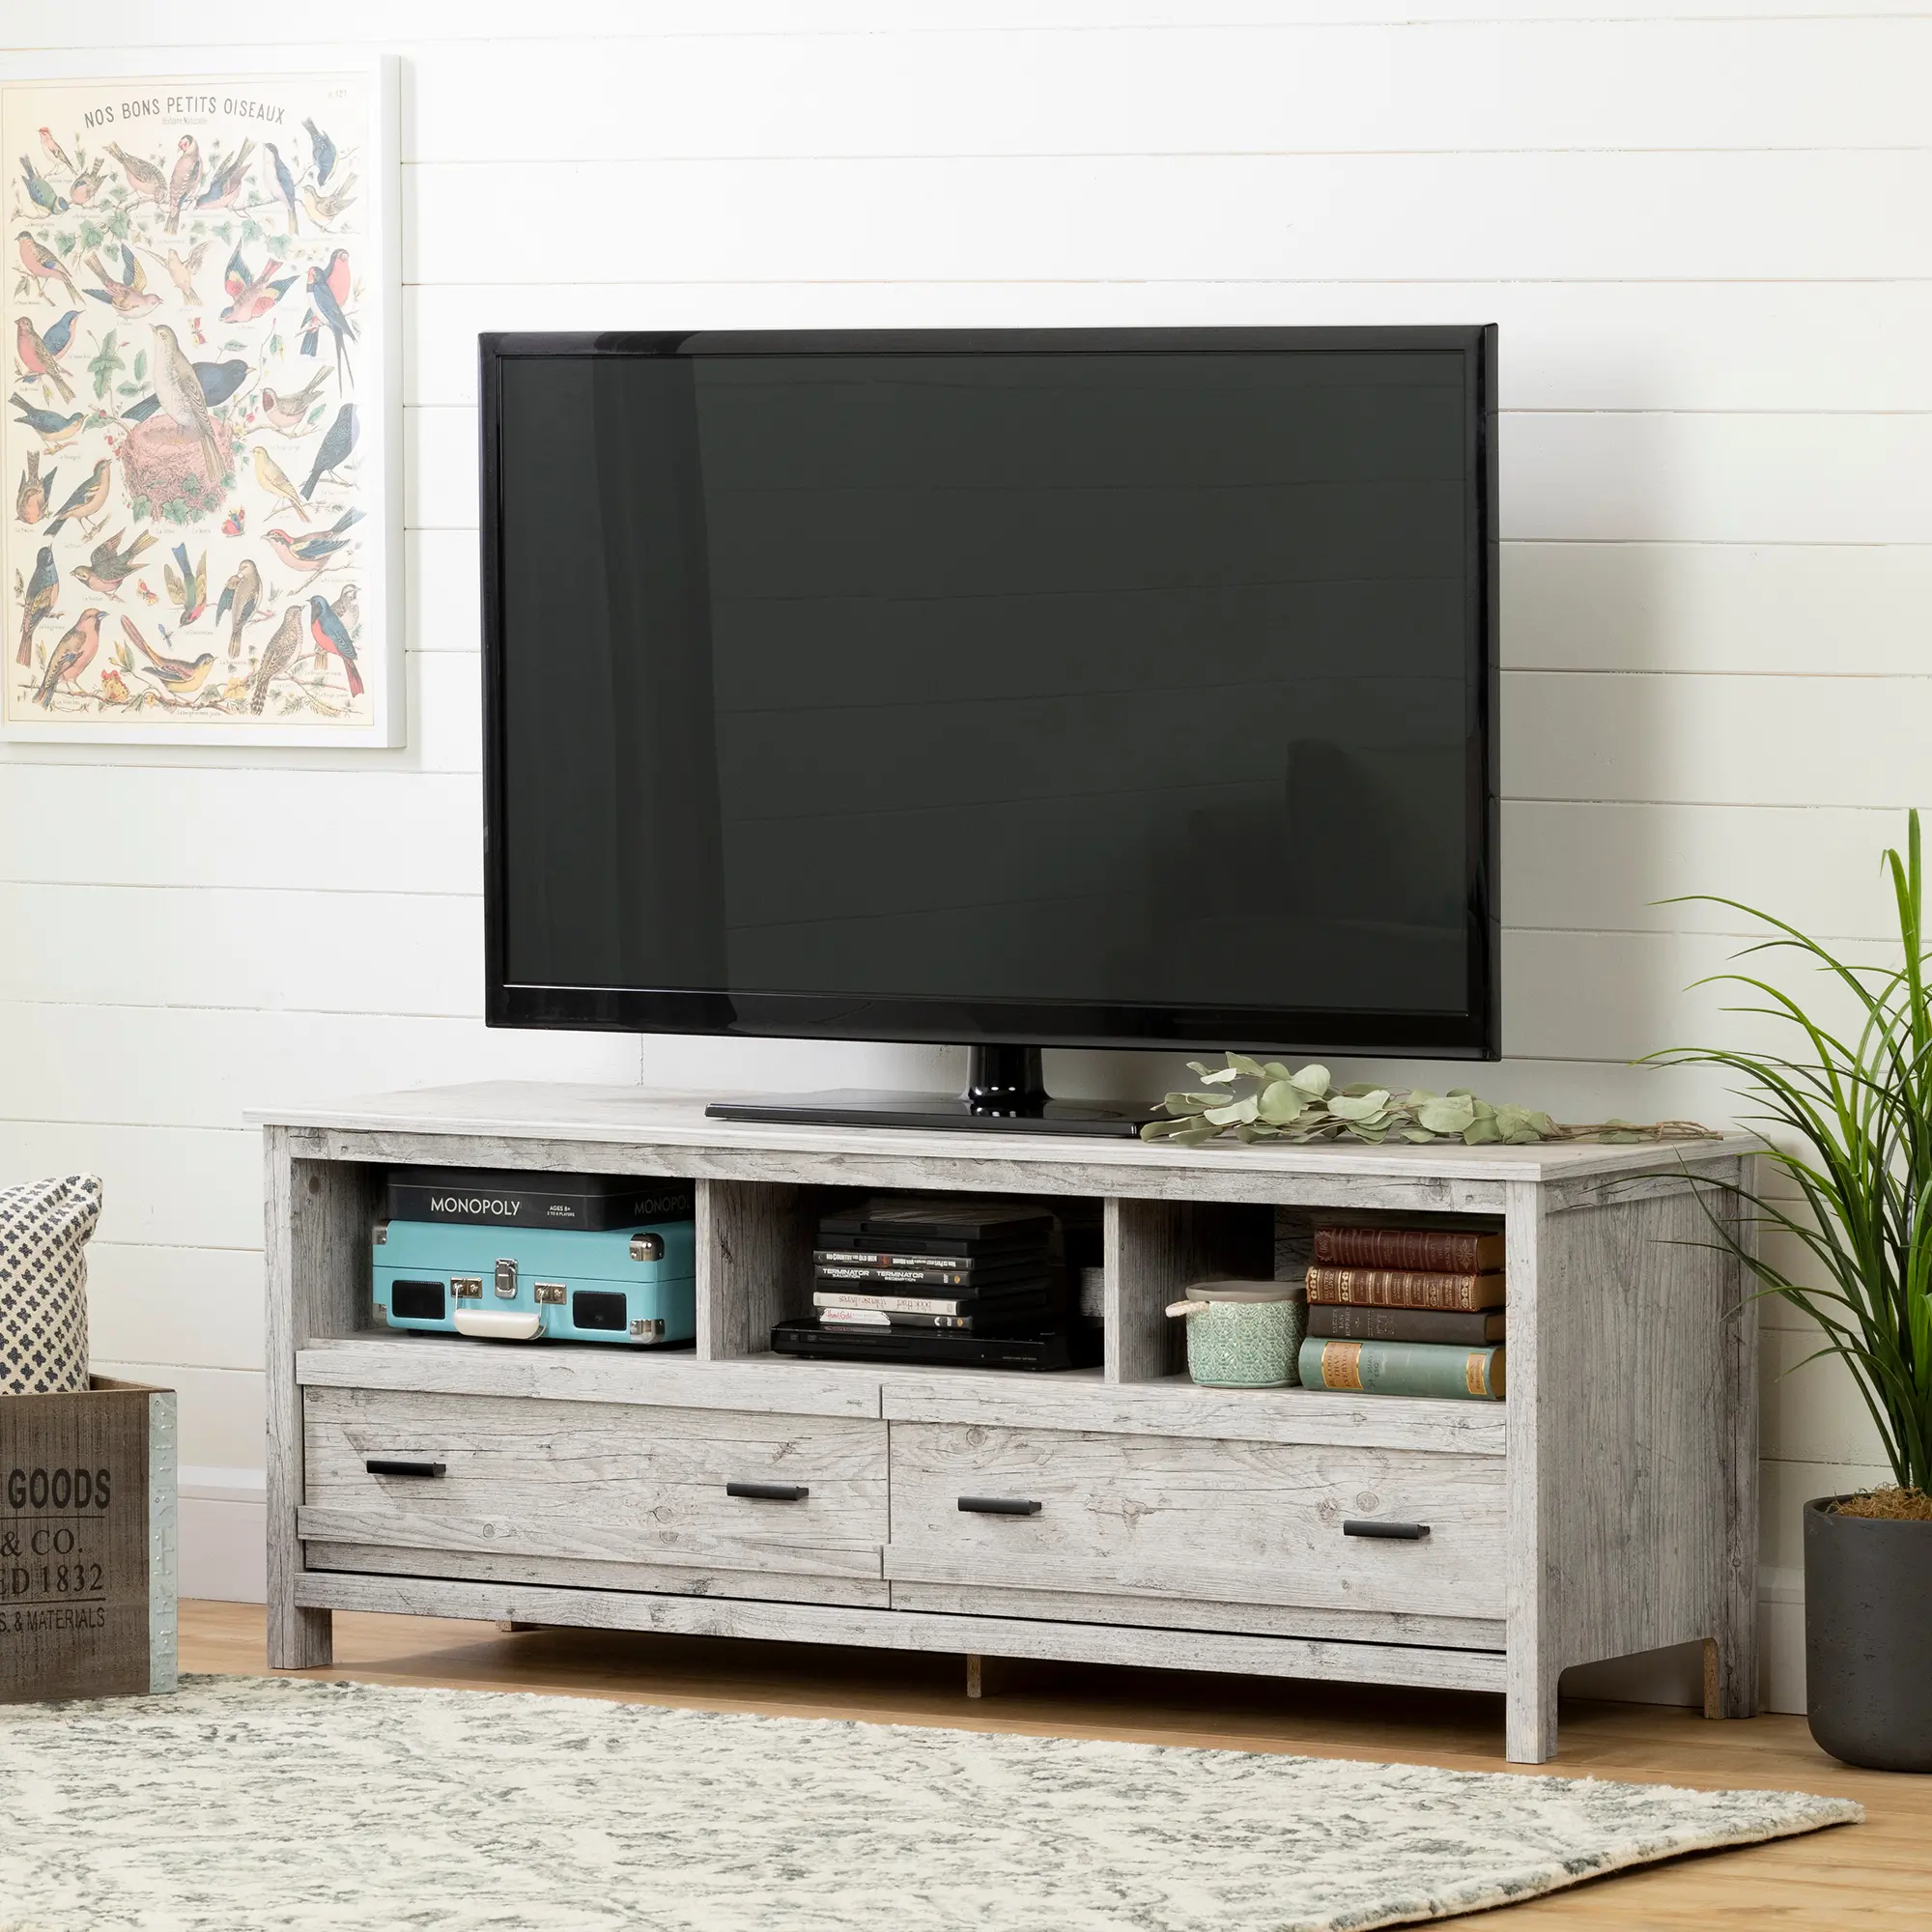 11887 Exhibit 60 inch Seaside Pine TV Stand - South Shor sku 11887